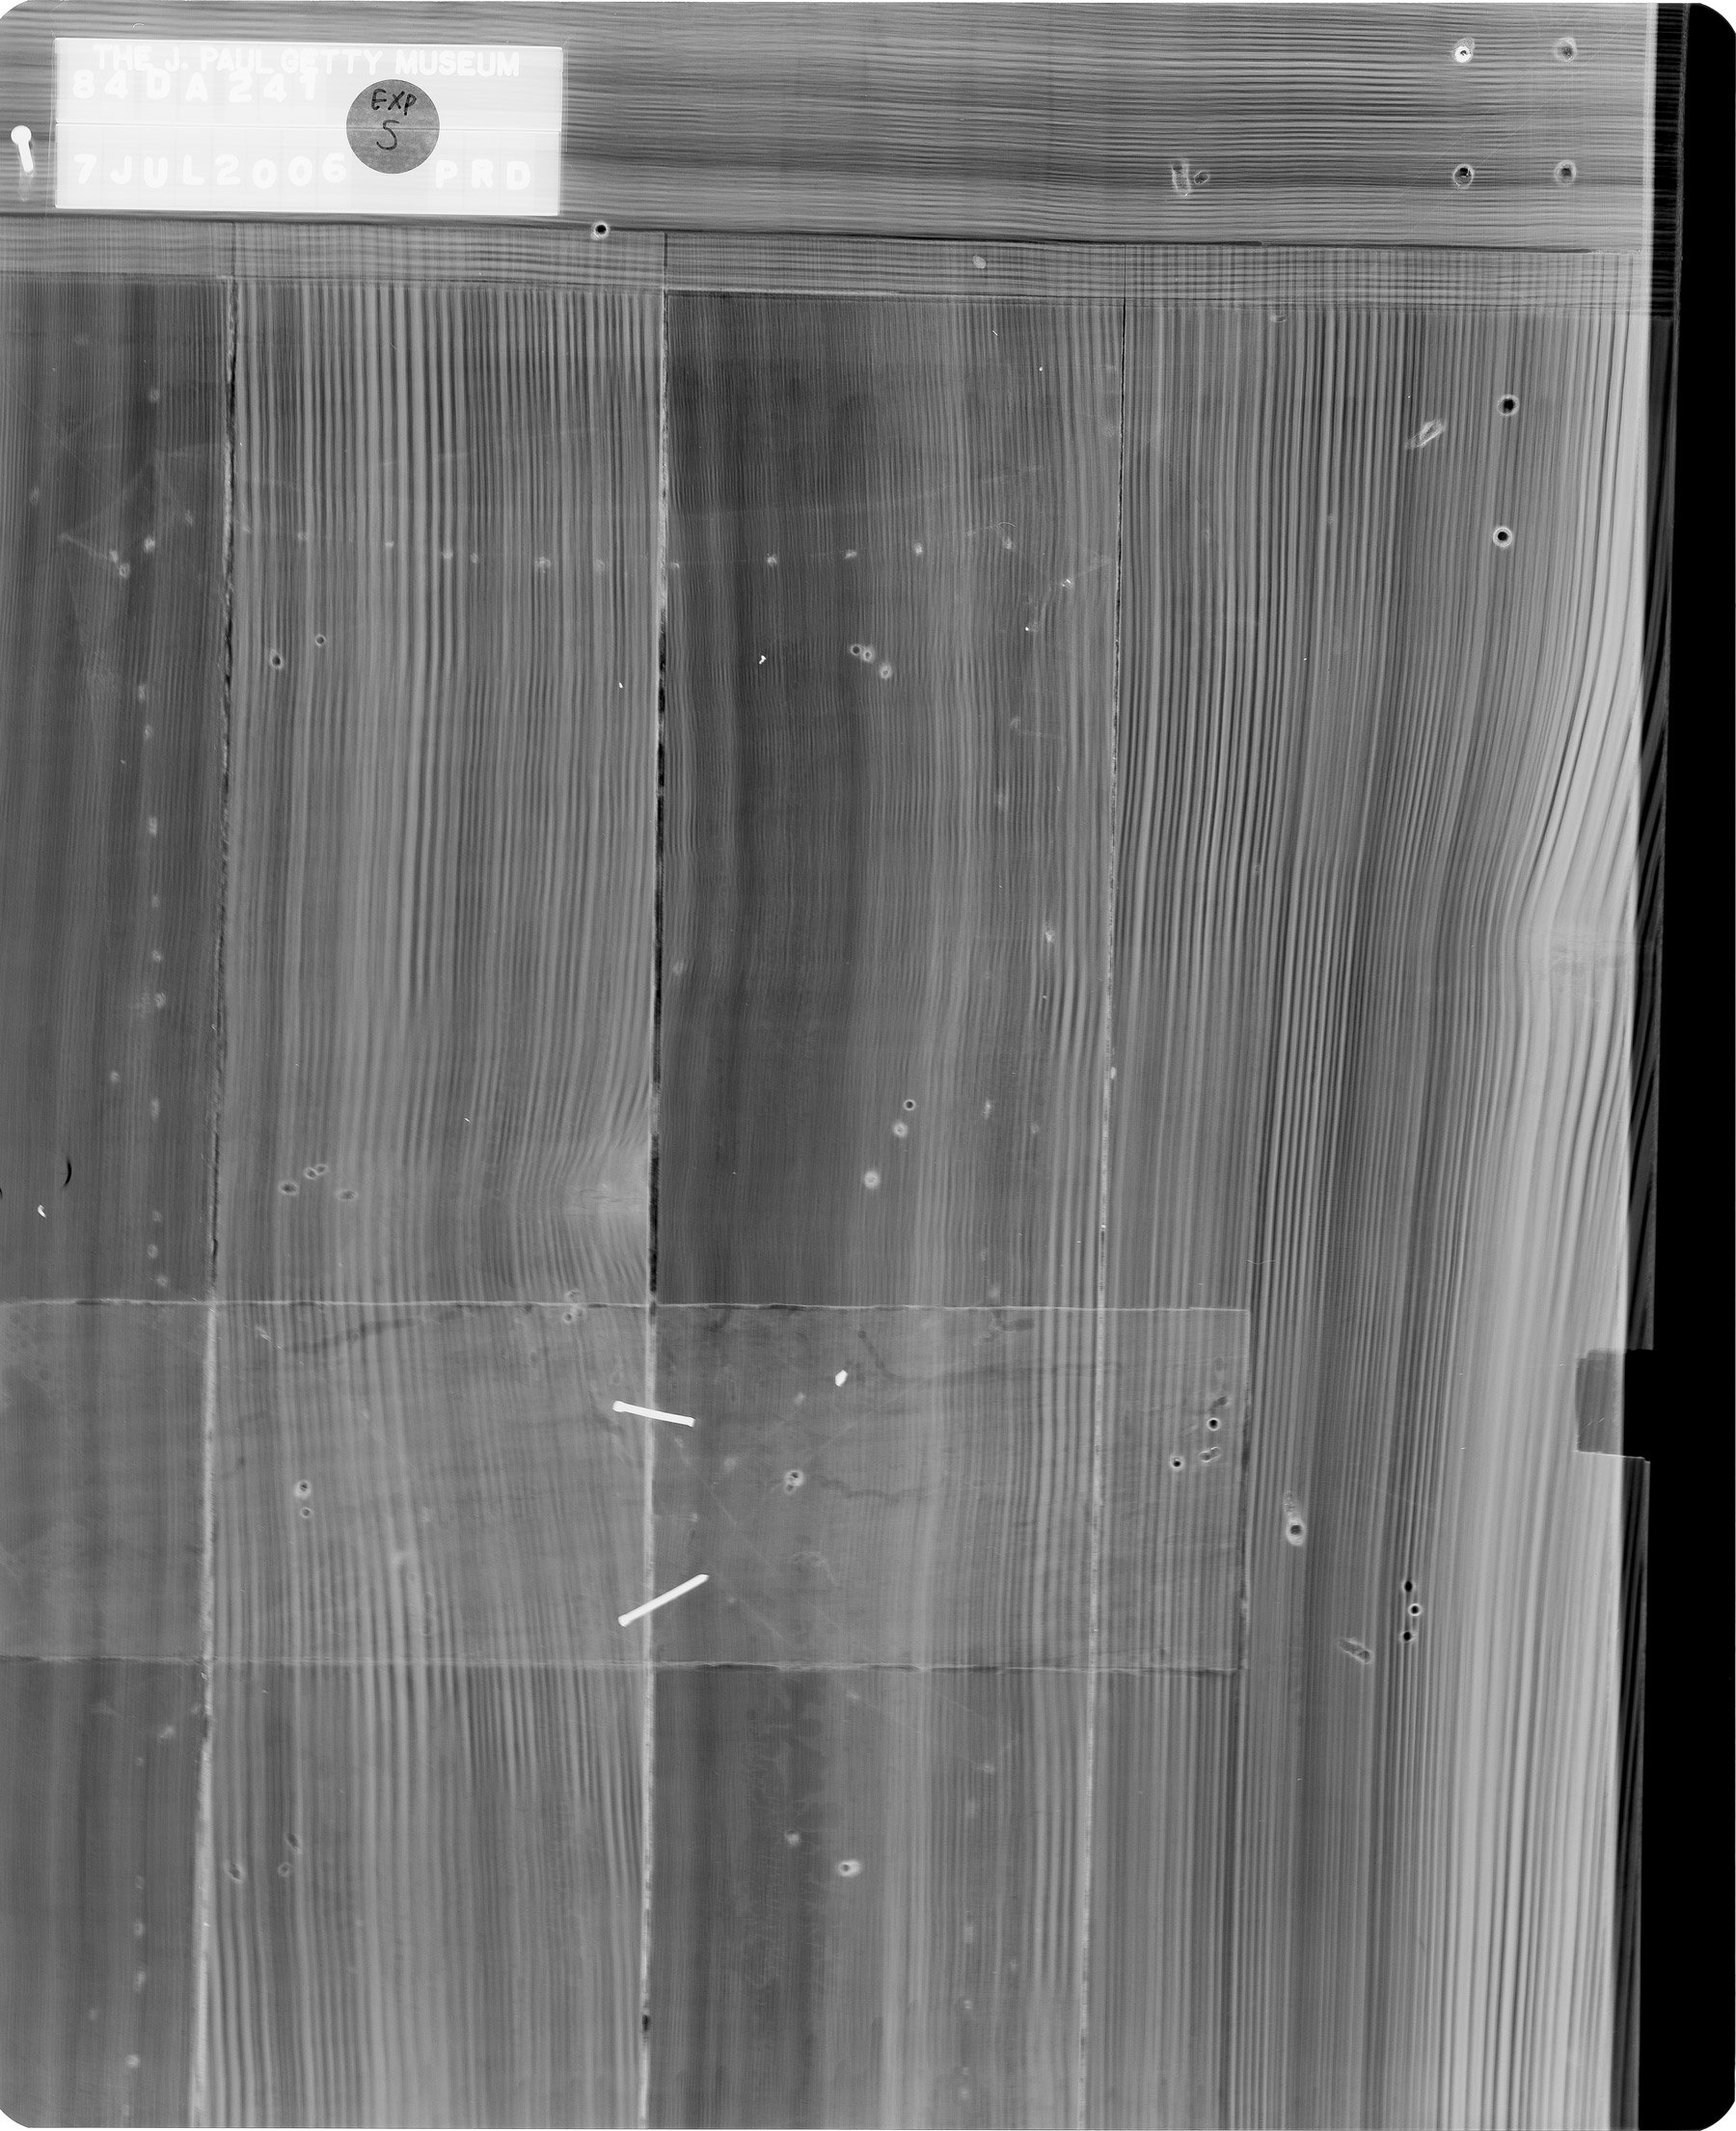 black and white x-ray of the lower left door of one of the cabinets, revealing the hidden joinery that connects the multiple vertical wooden panels that make up the cabinet door